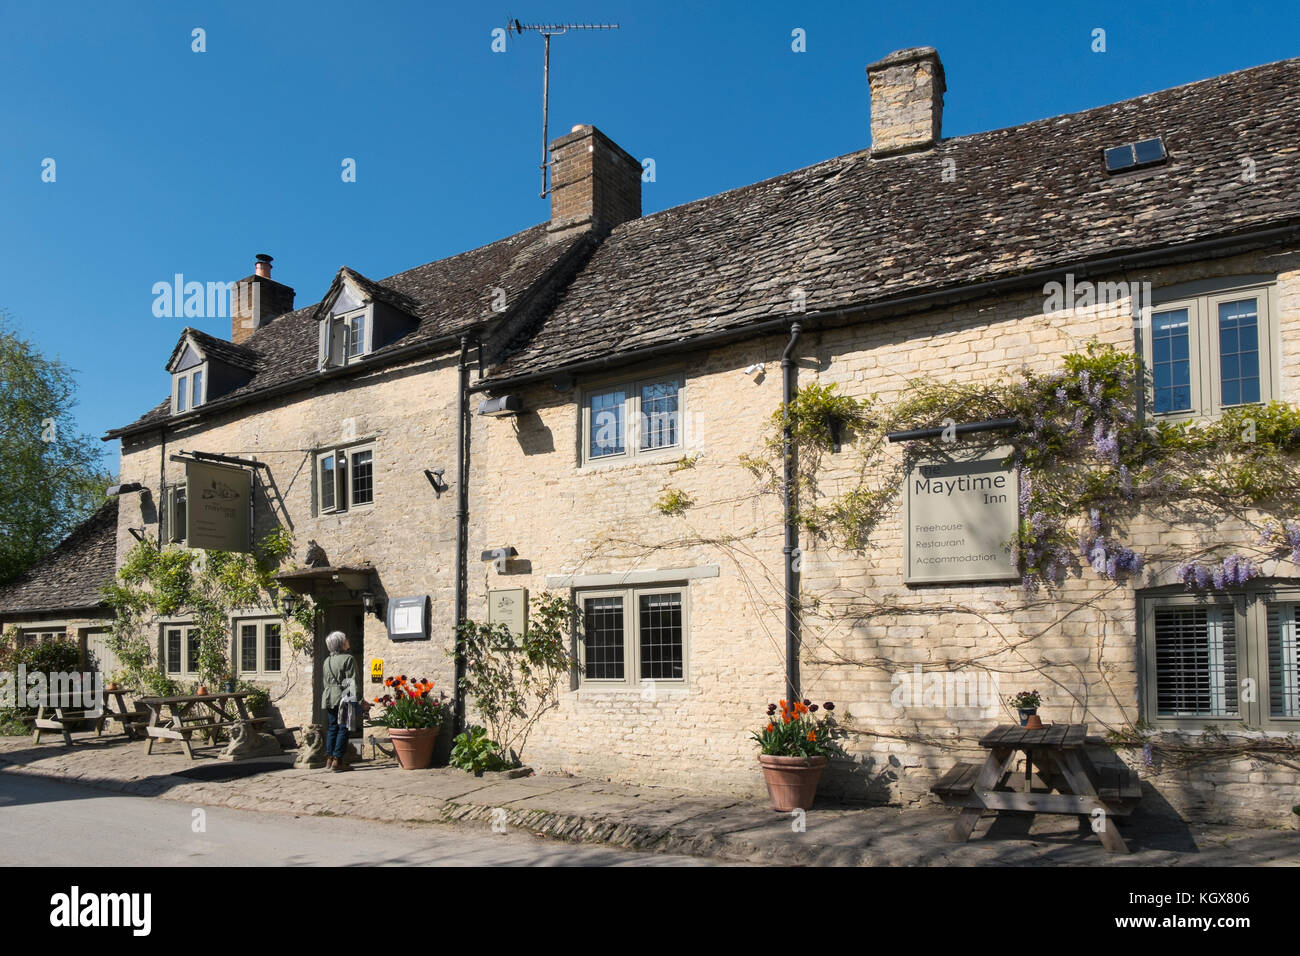 The Maytime Inn in Asthall, Oxfordshire, UK. Stock Photo